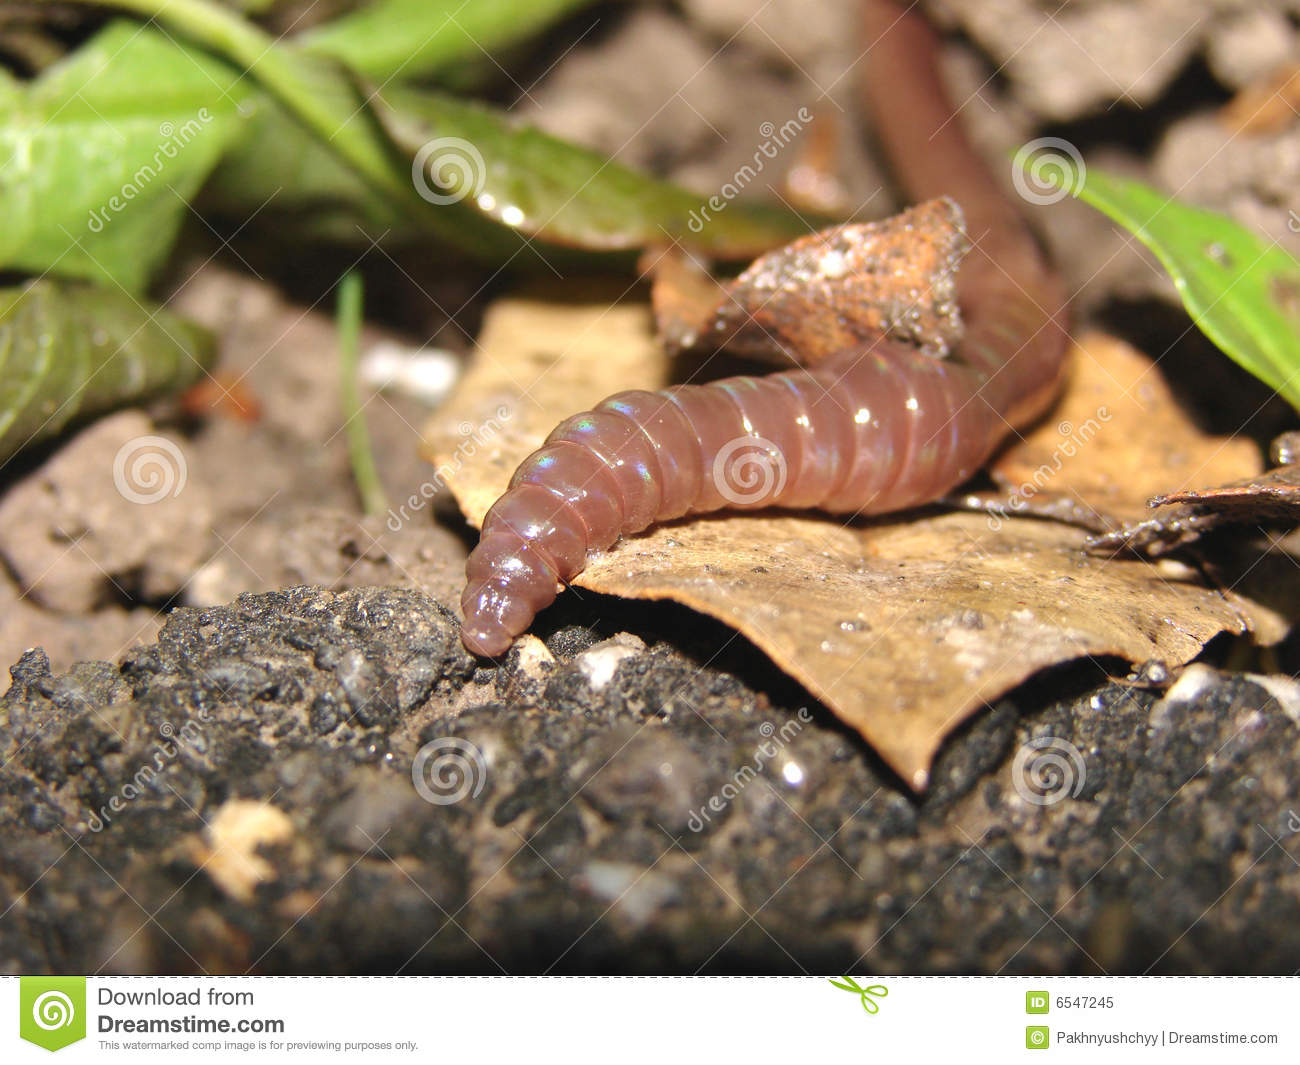 Macro View Of An Earth Worm Moving Through The Soil 